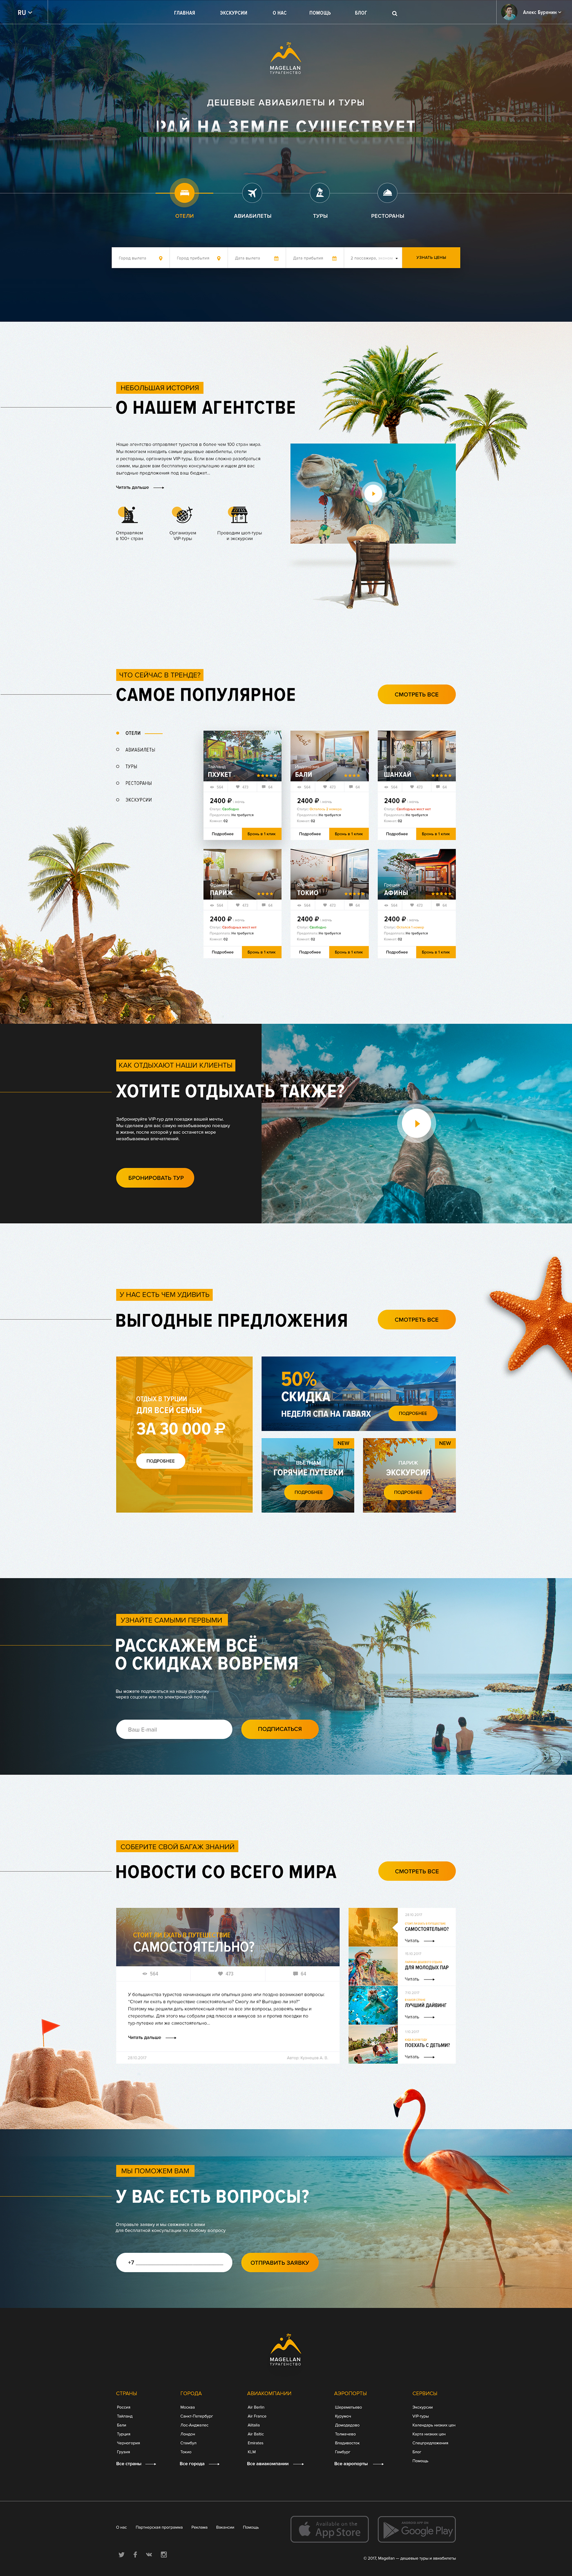 tour Travel trip rest Booking hotel Flying Tickets Турагентство отдых